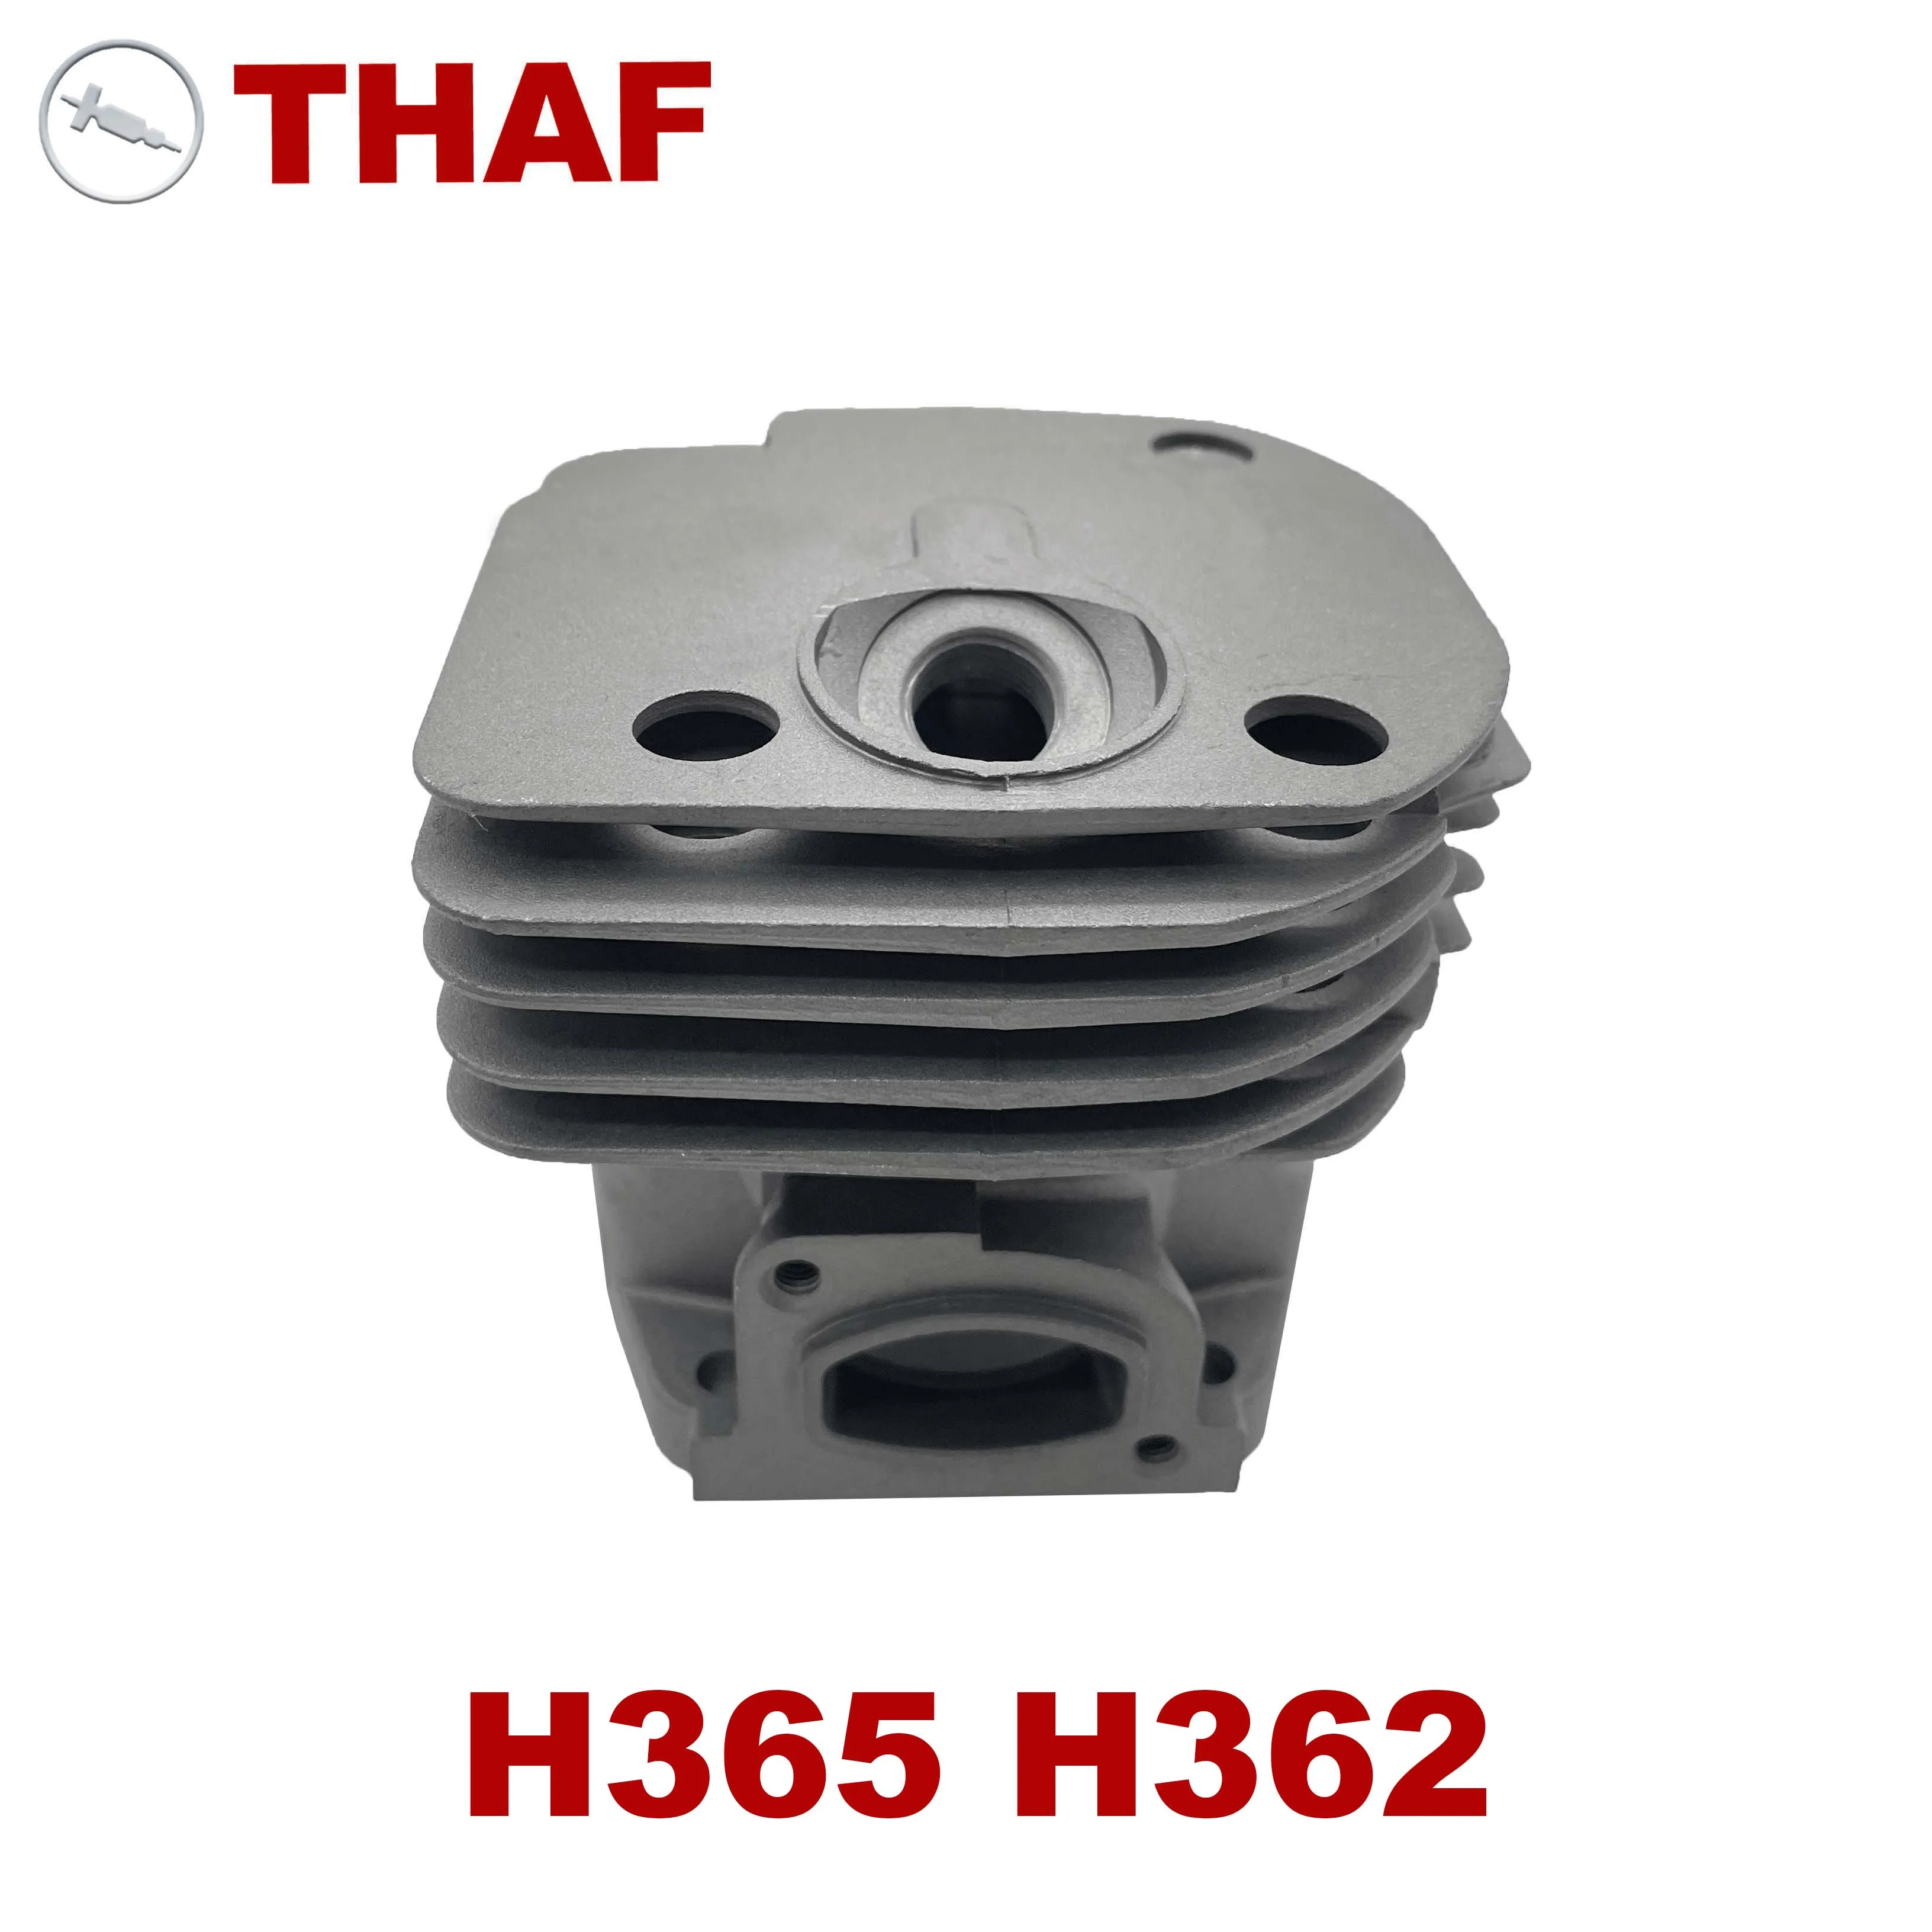 

THAF Cylinder Assy Replacement Garden Tools Spare Parts for STIHL ChainSaw H365 H362 Square